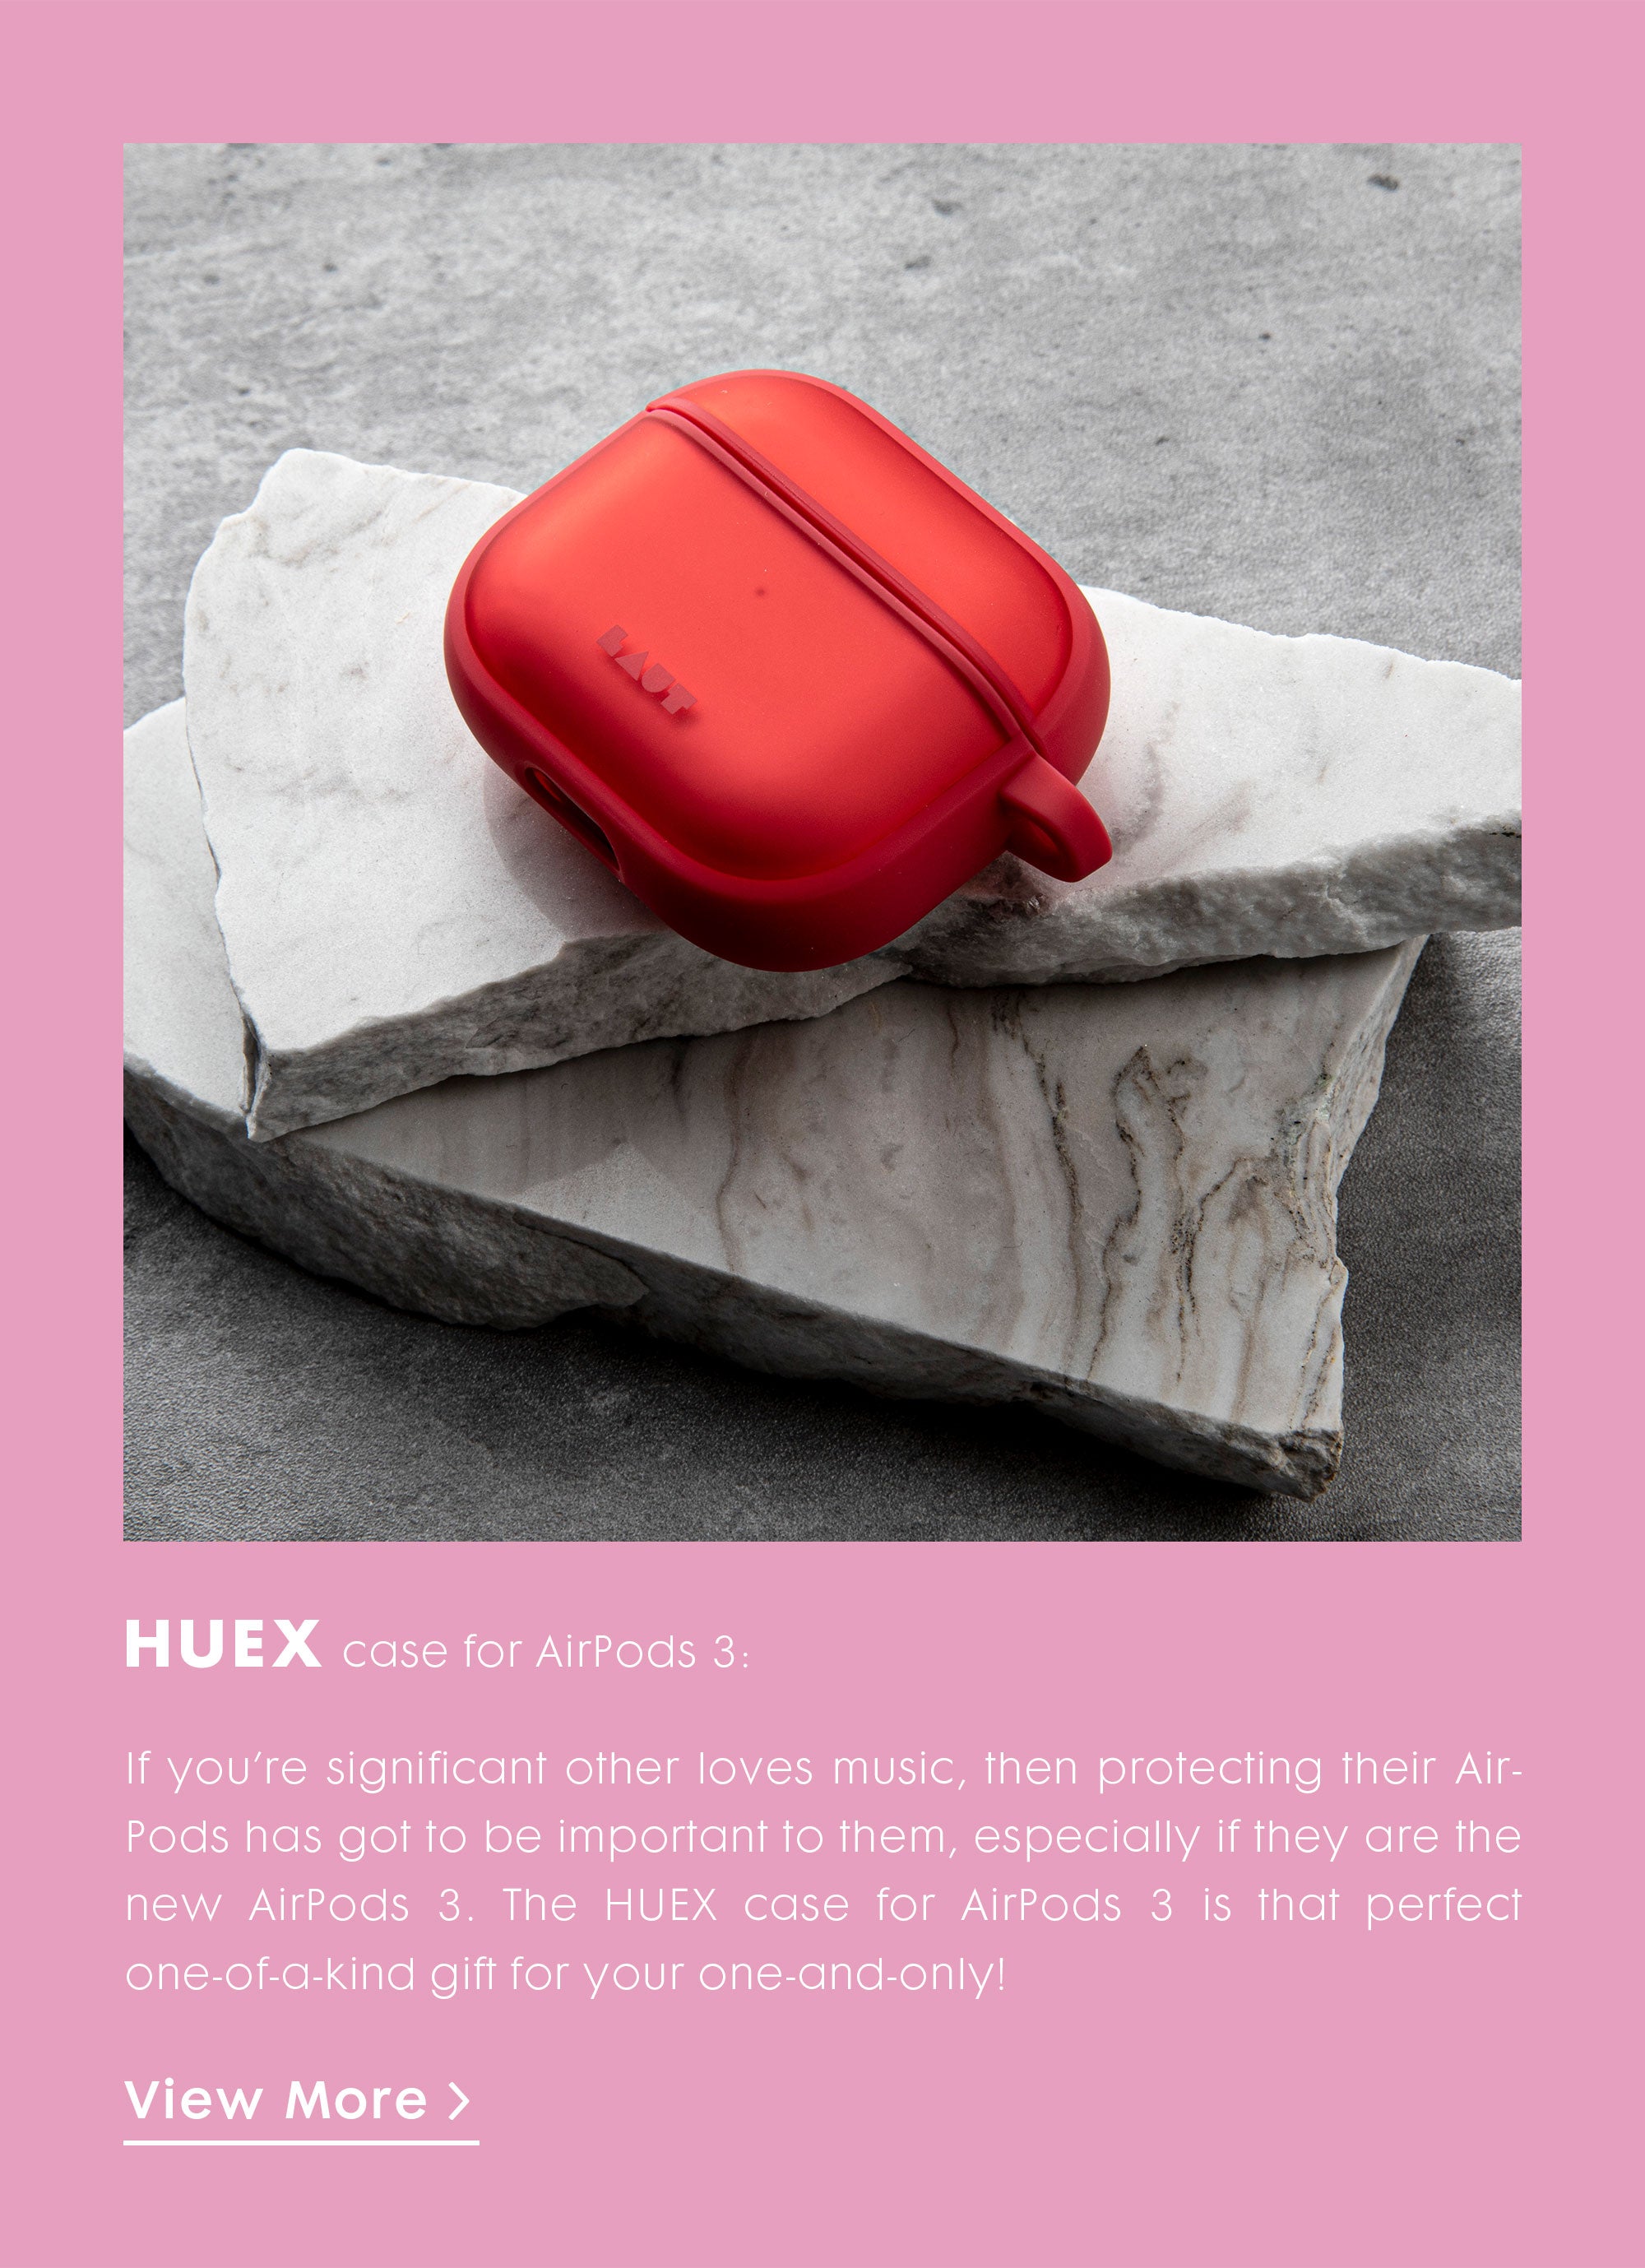 If you’re significant other loves music, then protecting their AirPods has got to be important to them, especially if they are the new AirPods 3. The HUEX case for AirPods 3 is that perfect one-of-a-kind gift for your one-and-only! 